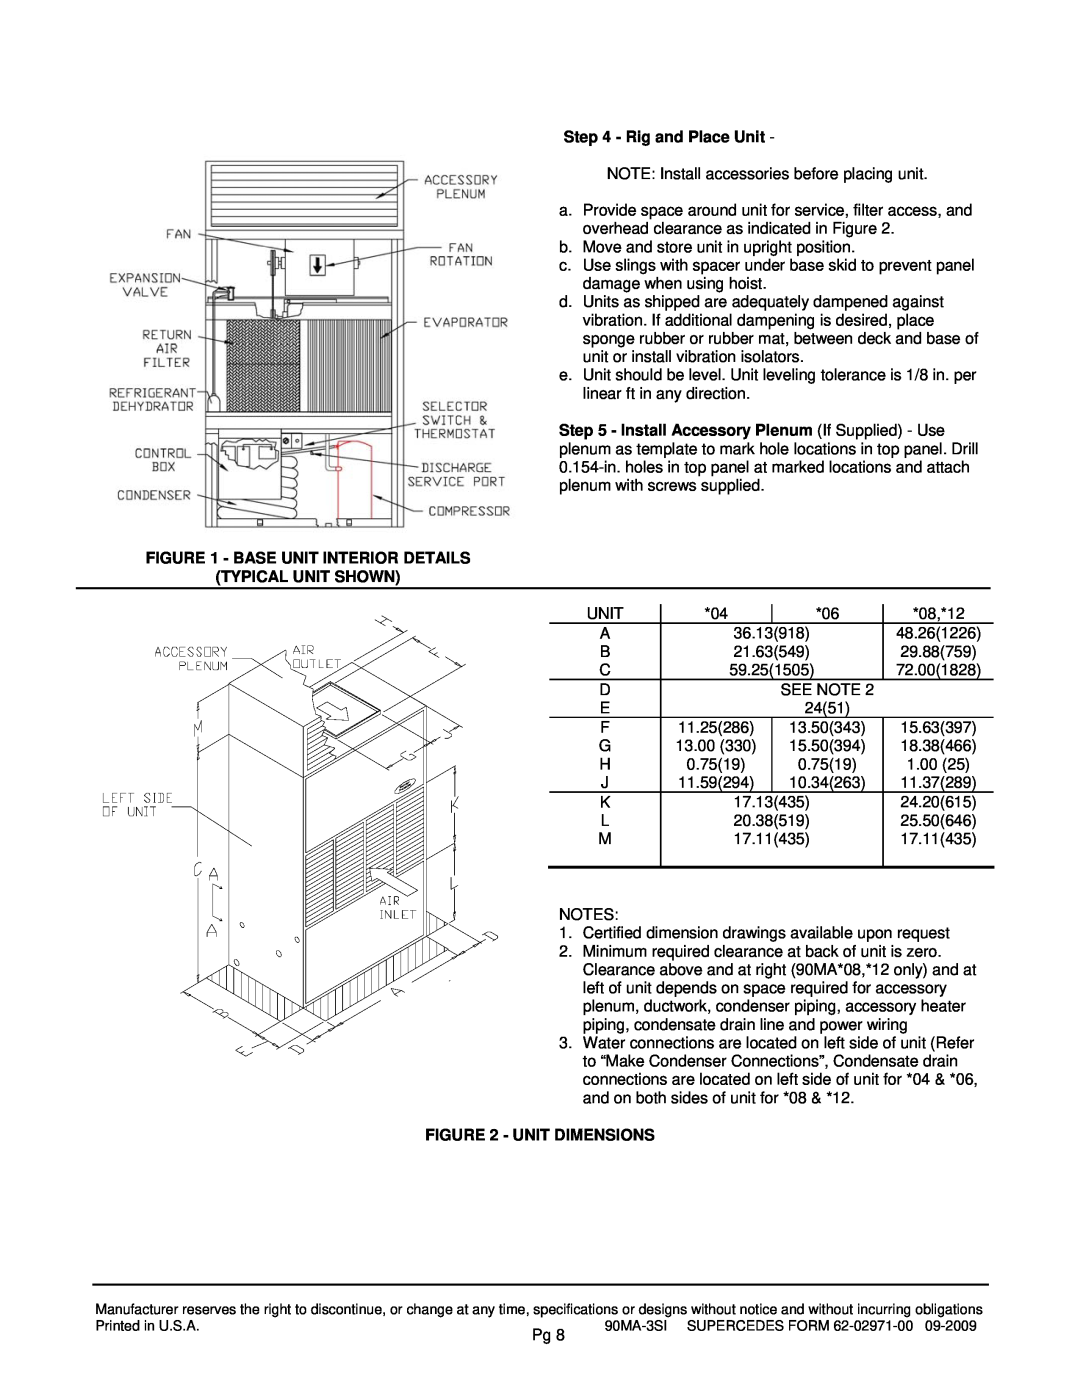 Carrier 90MA, 90MU specifications Rig and Place Unit, Base Unit Interior Details, Typical Unit Shown, Unit Dimensions 